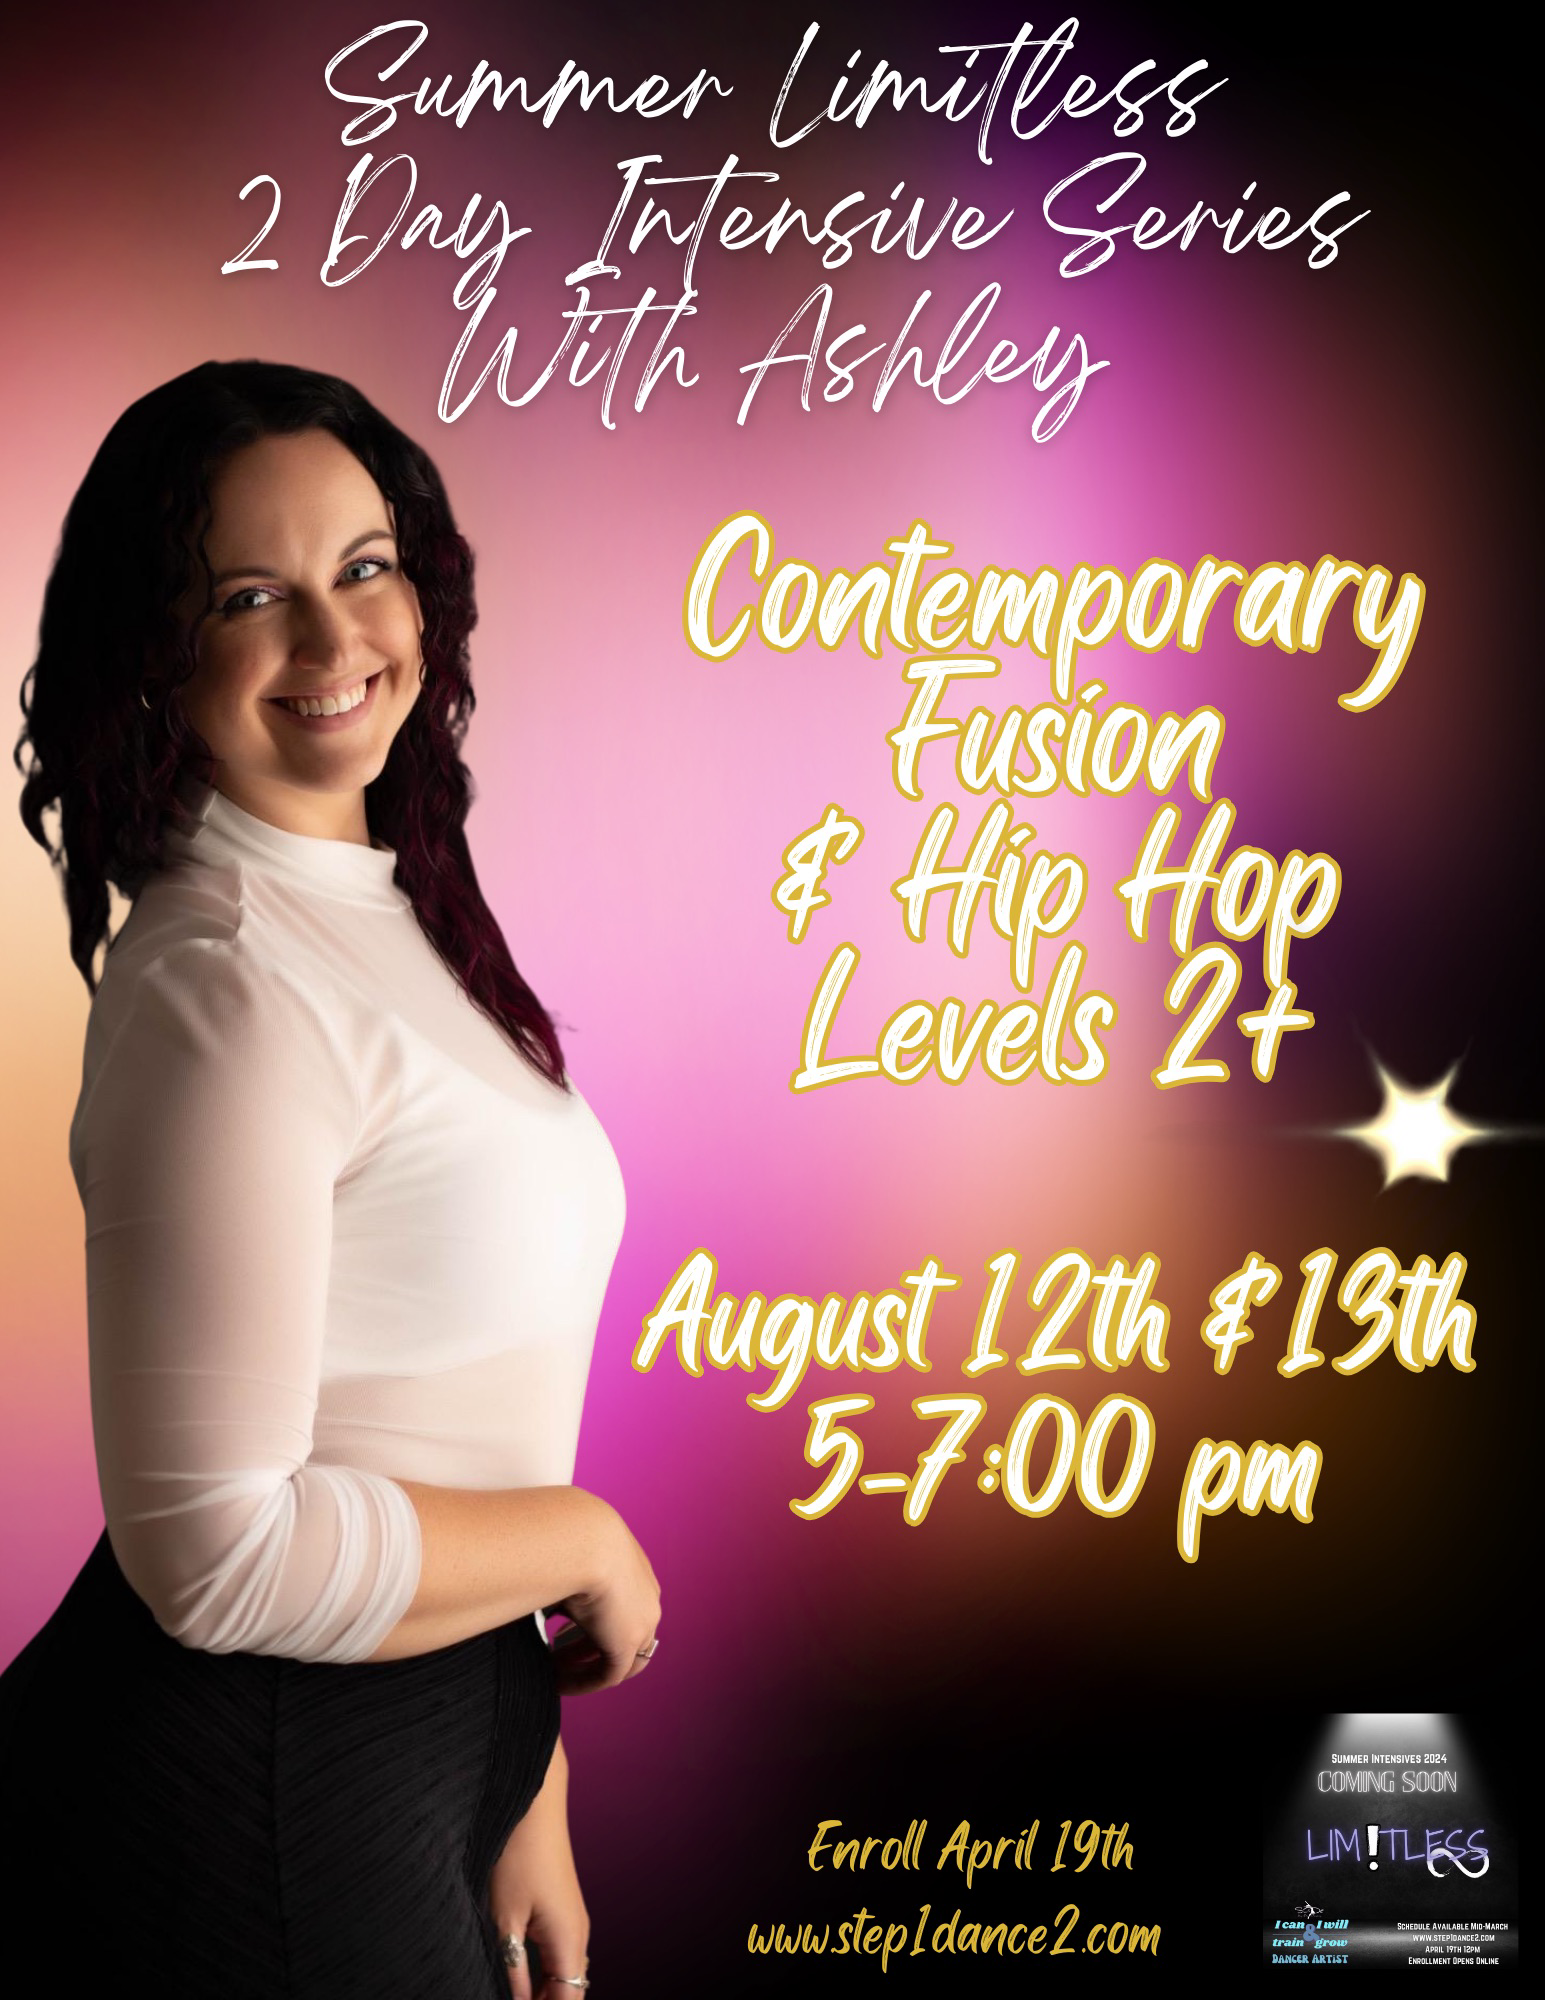 Limitless Contemporary Fusion & Hip Hop with Ashley